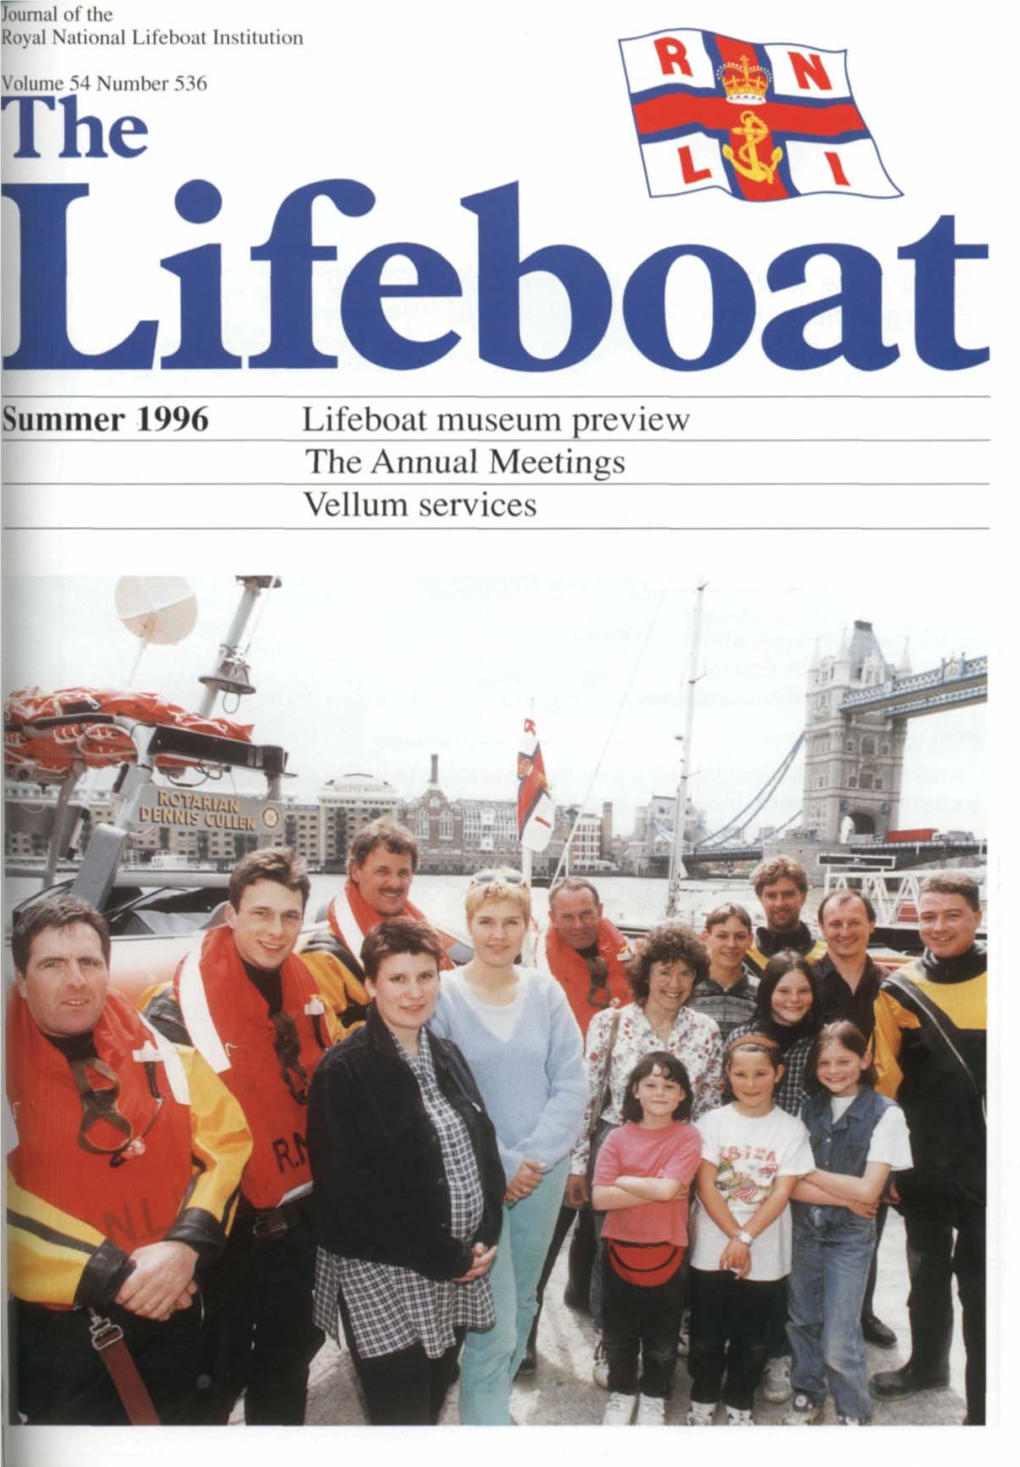 Lifeboat Institution